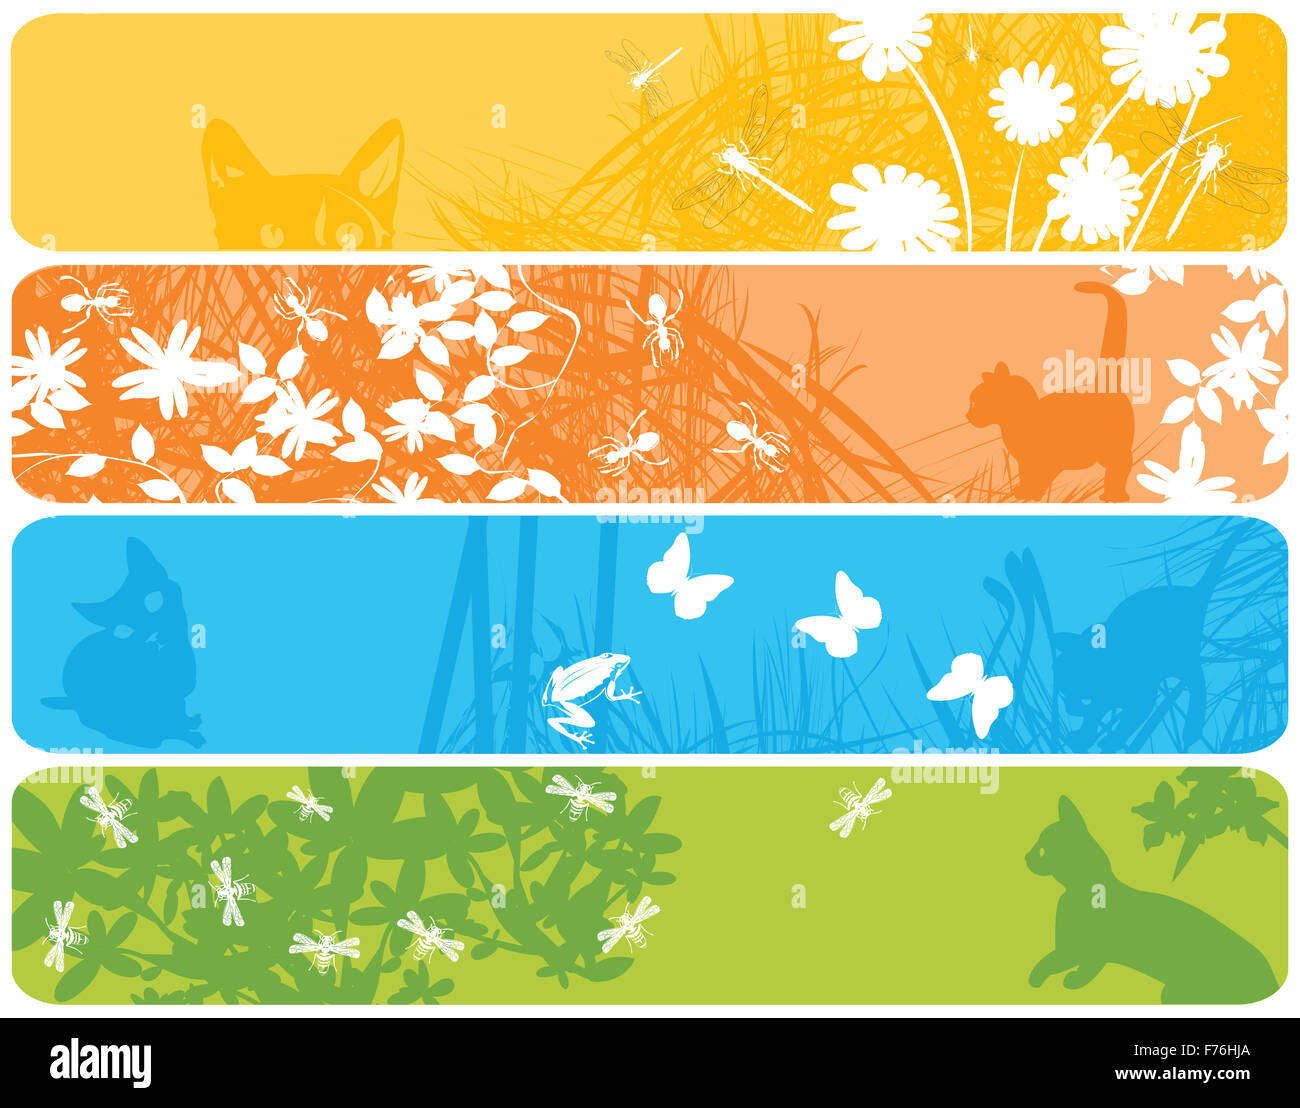 Web banners with spring theme Stock Photo